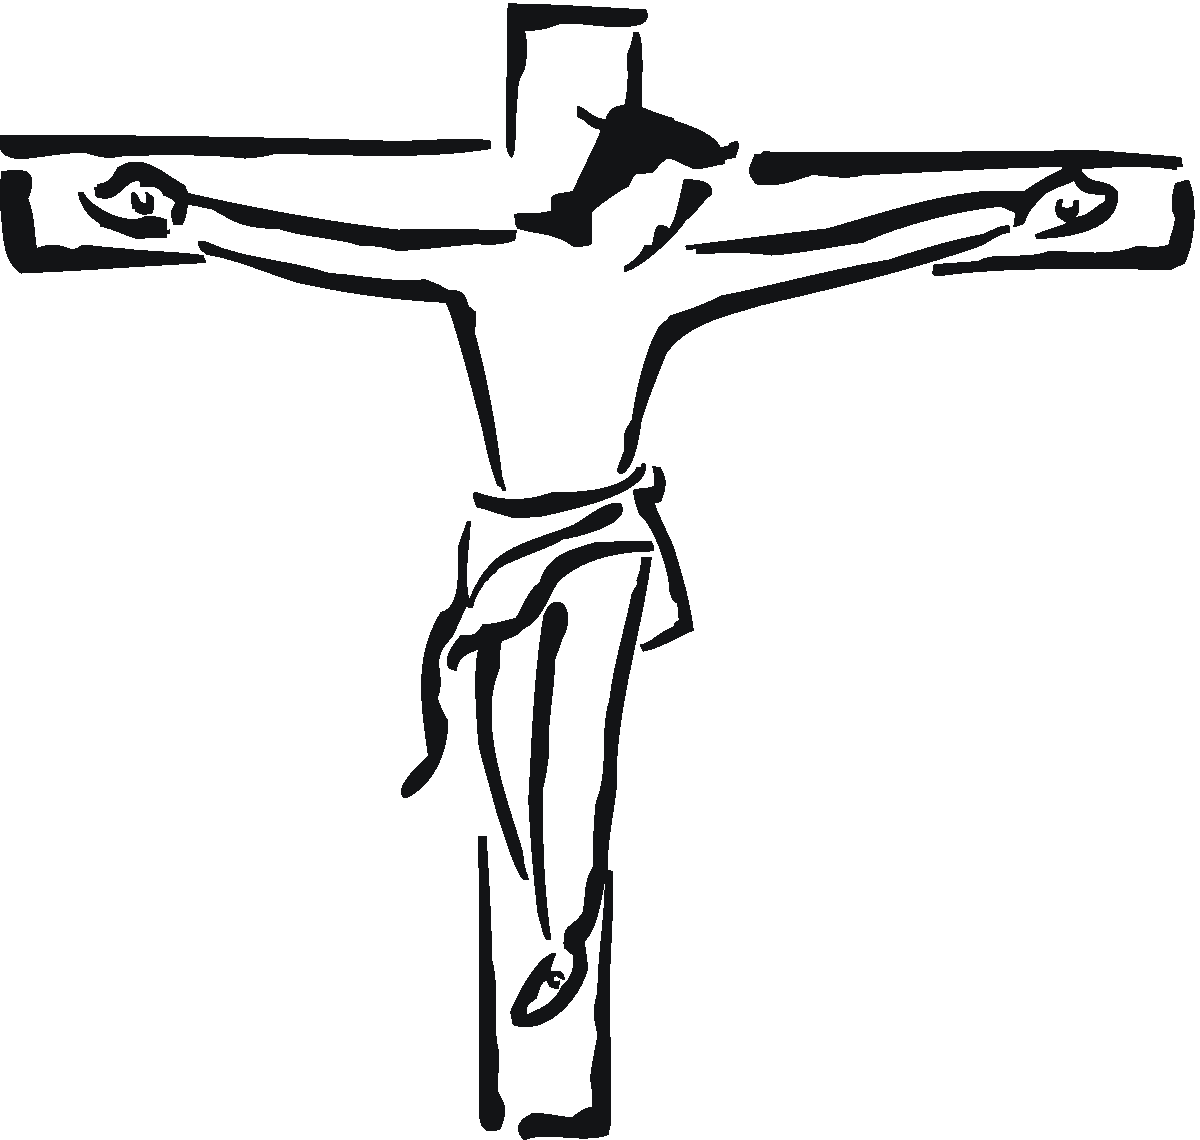 stations of the cross clip art stations of the cross clipart best art cross stations the clip of 